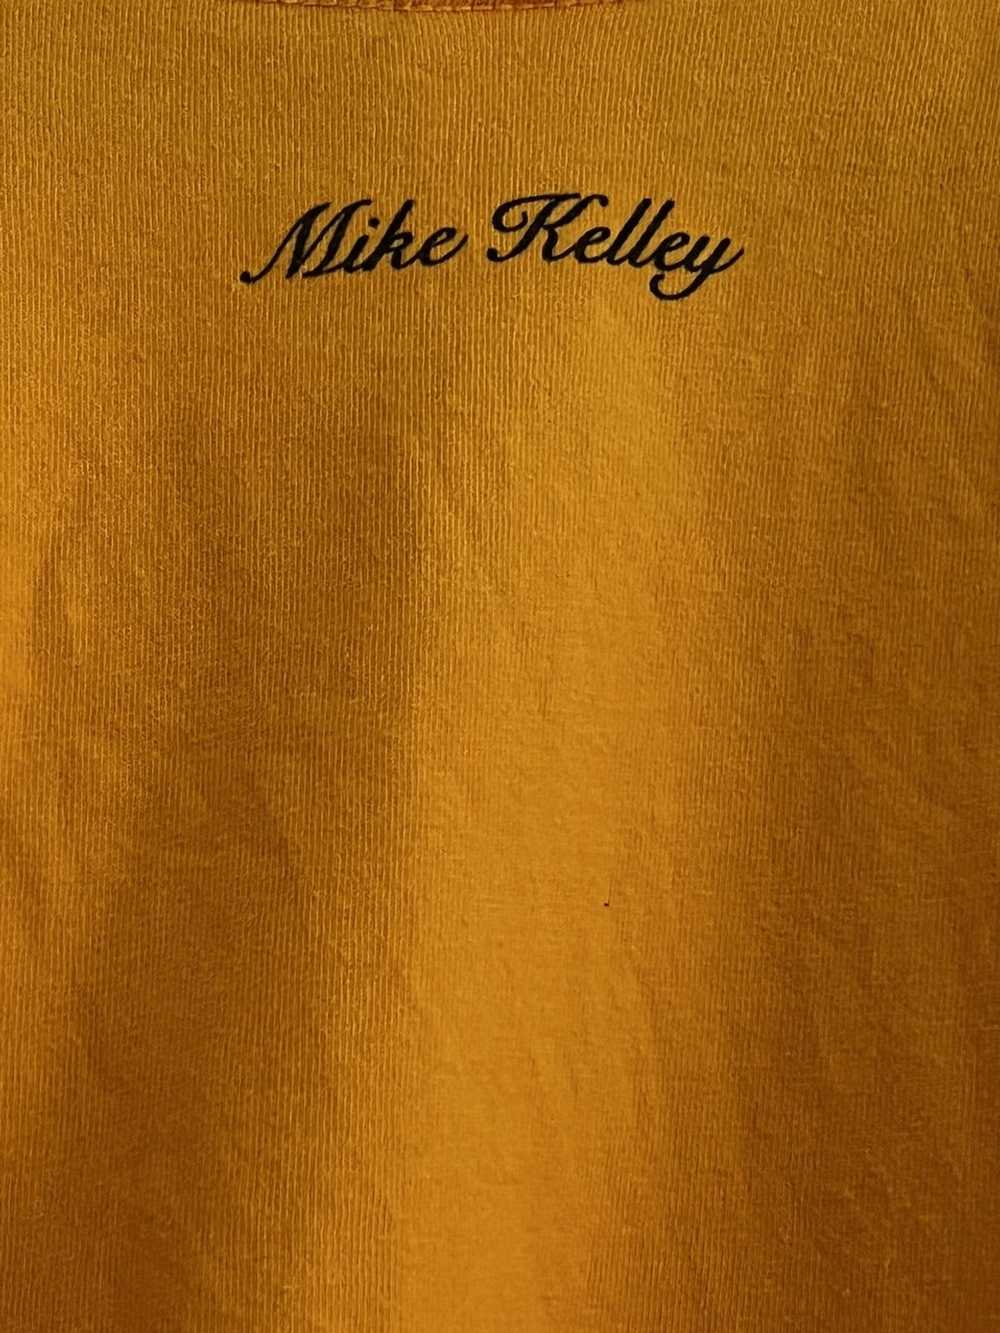 Supreme Supreme/Mike Kelly collab - Long sleeve t… - image 3